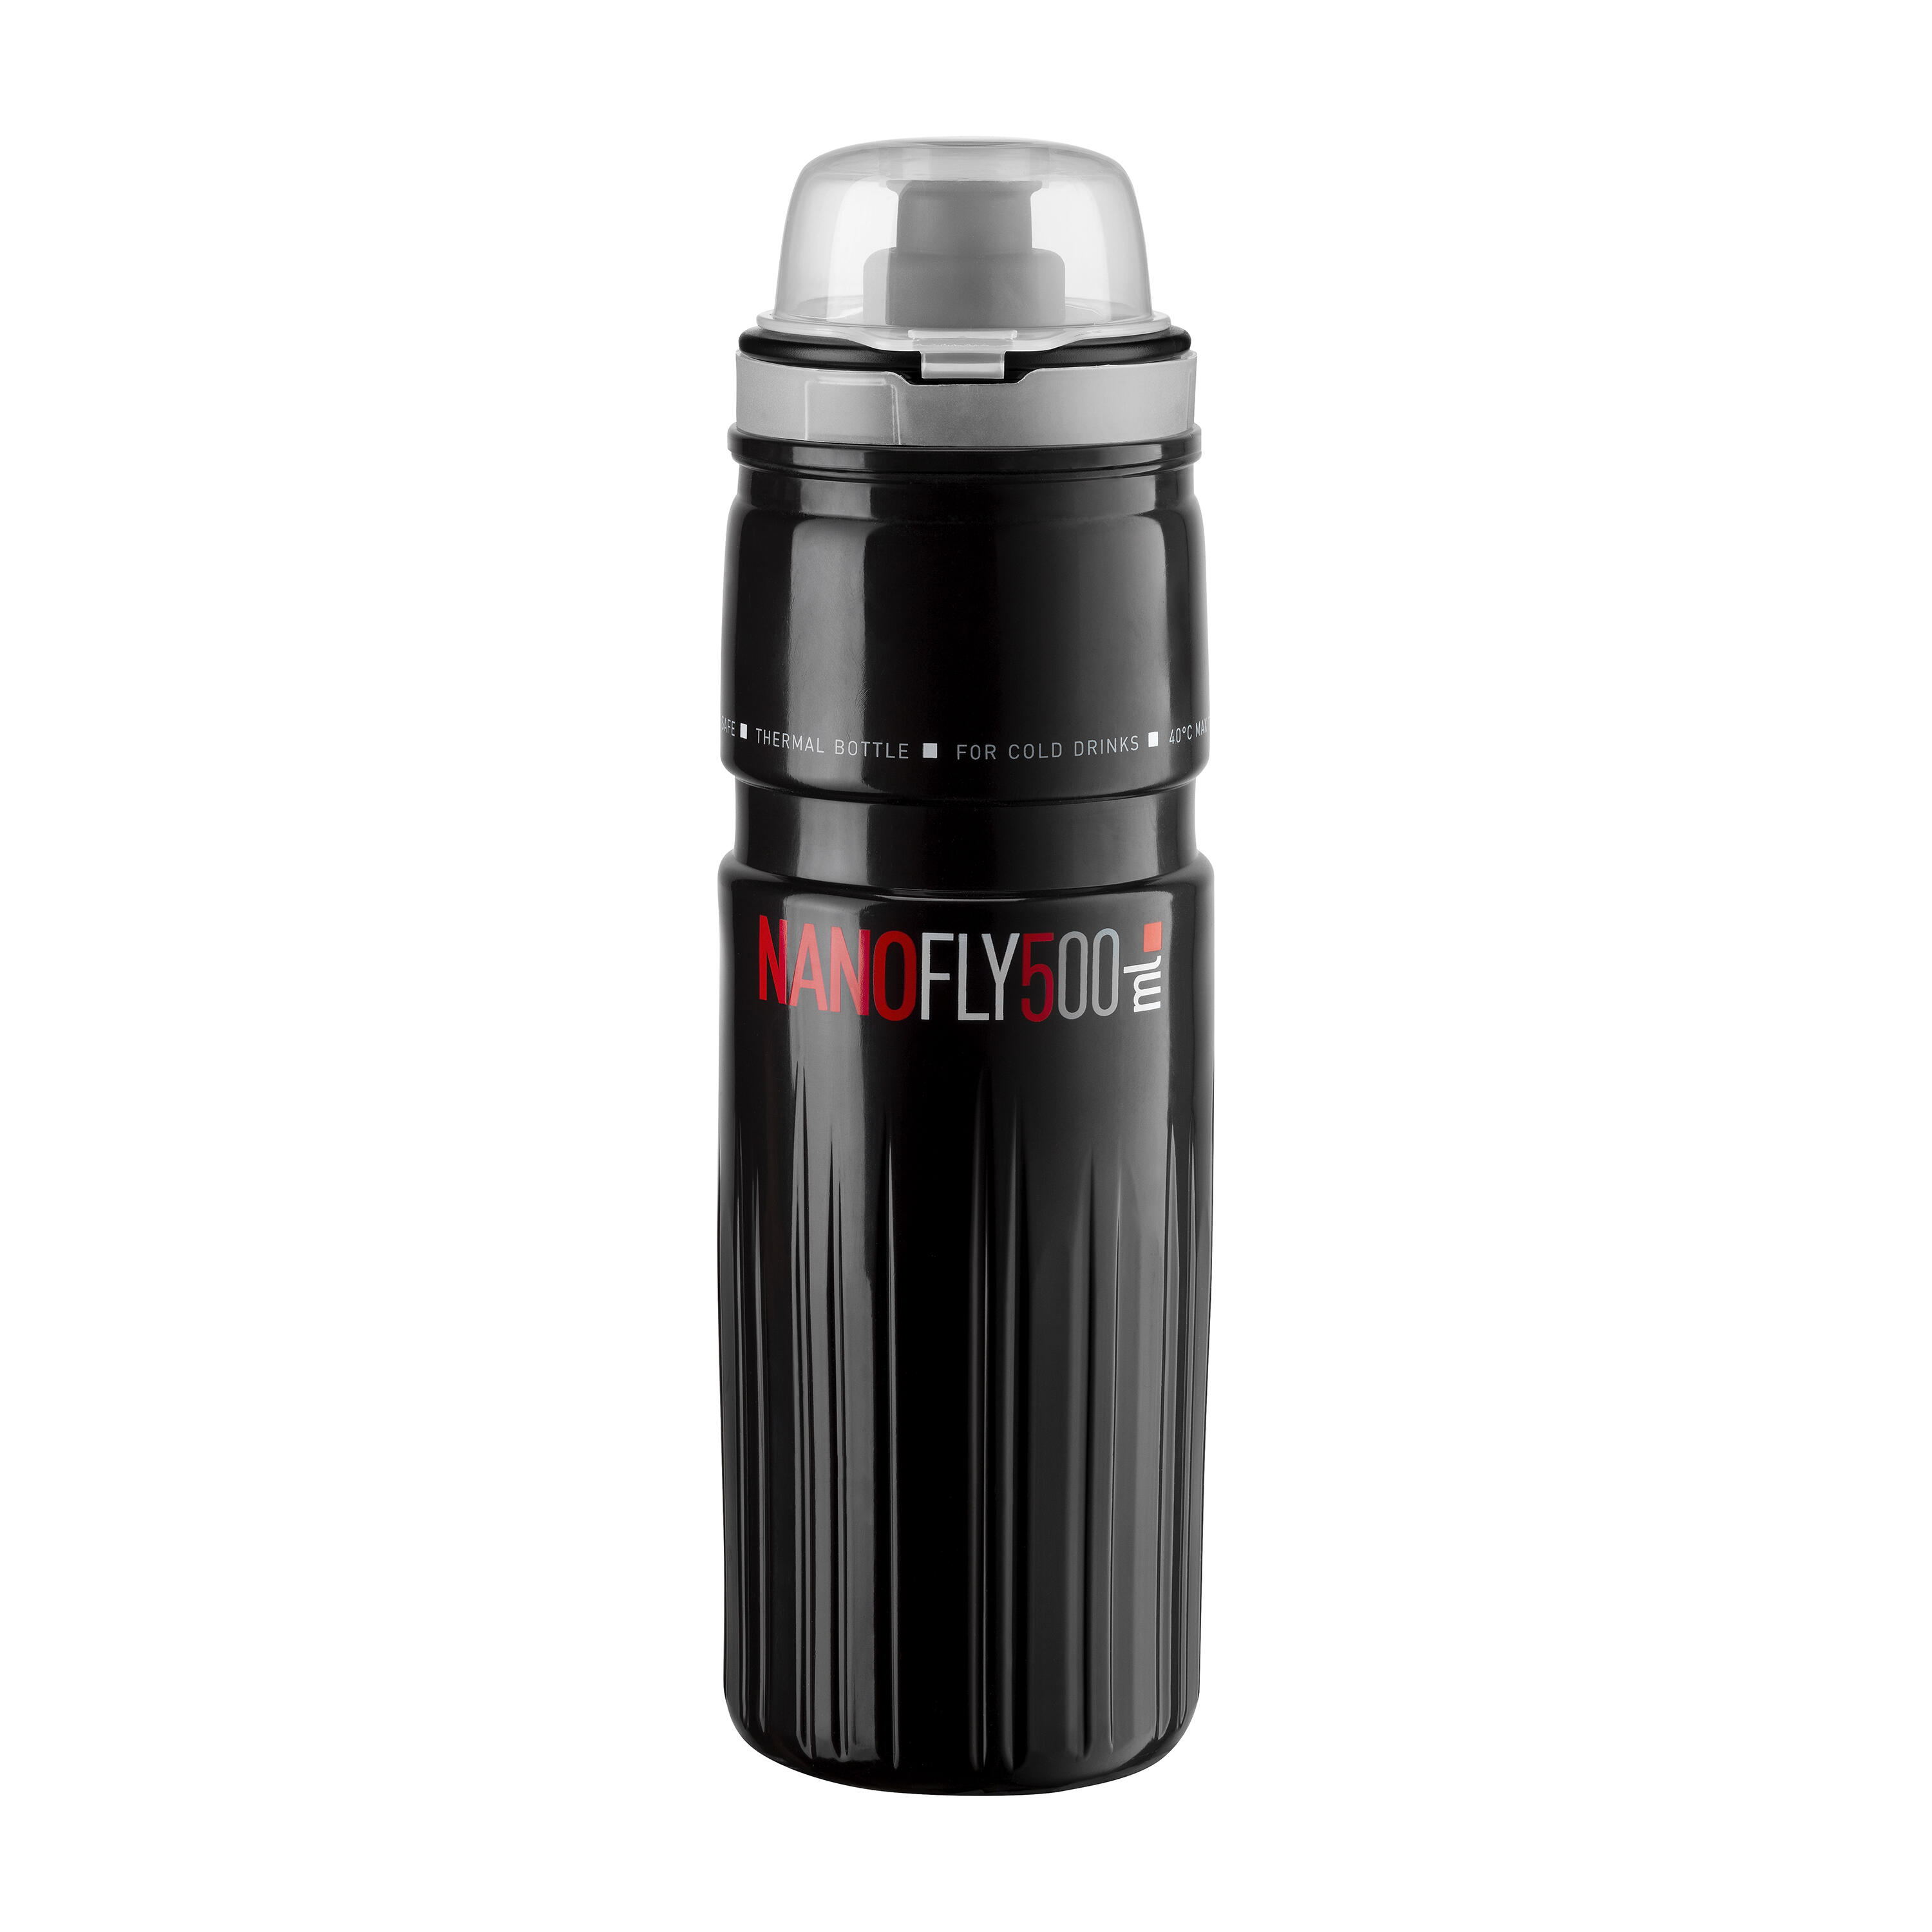 Nano Fly Thermal Cycling Water Bottle, Black - 500ml 2/4